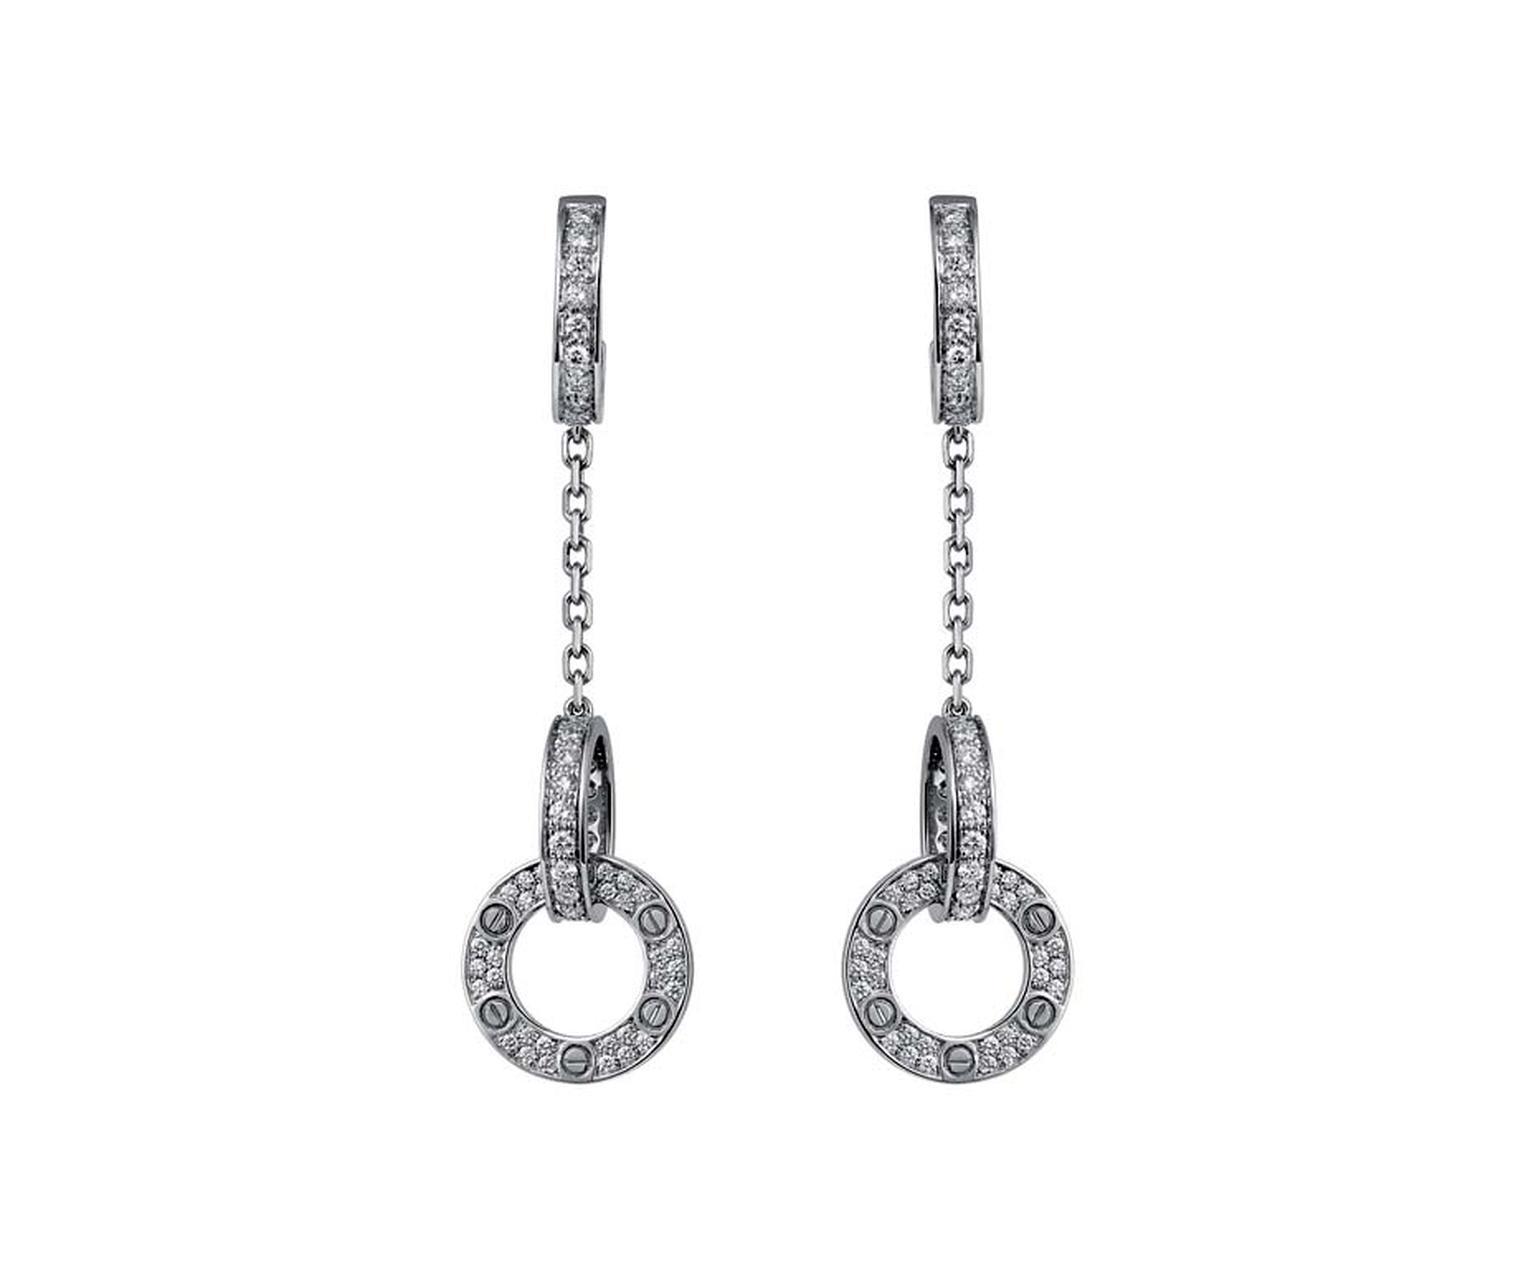 Resembling miniature handcuffs covered in diamonds, the Love drop earrings in platinum and diamonds are a strong statement about your feelings towards your loved one.